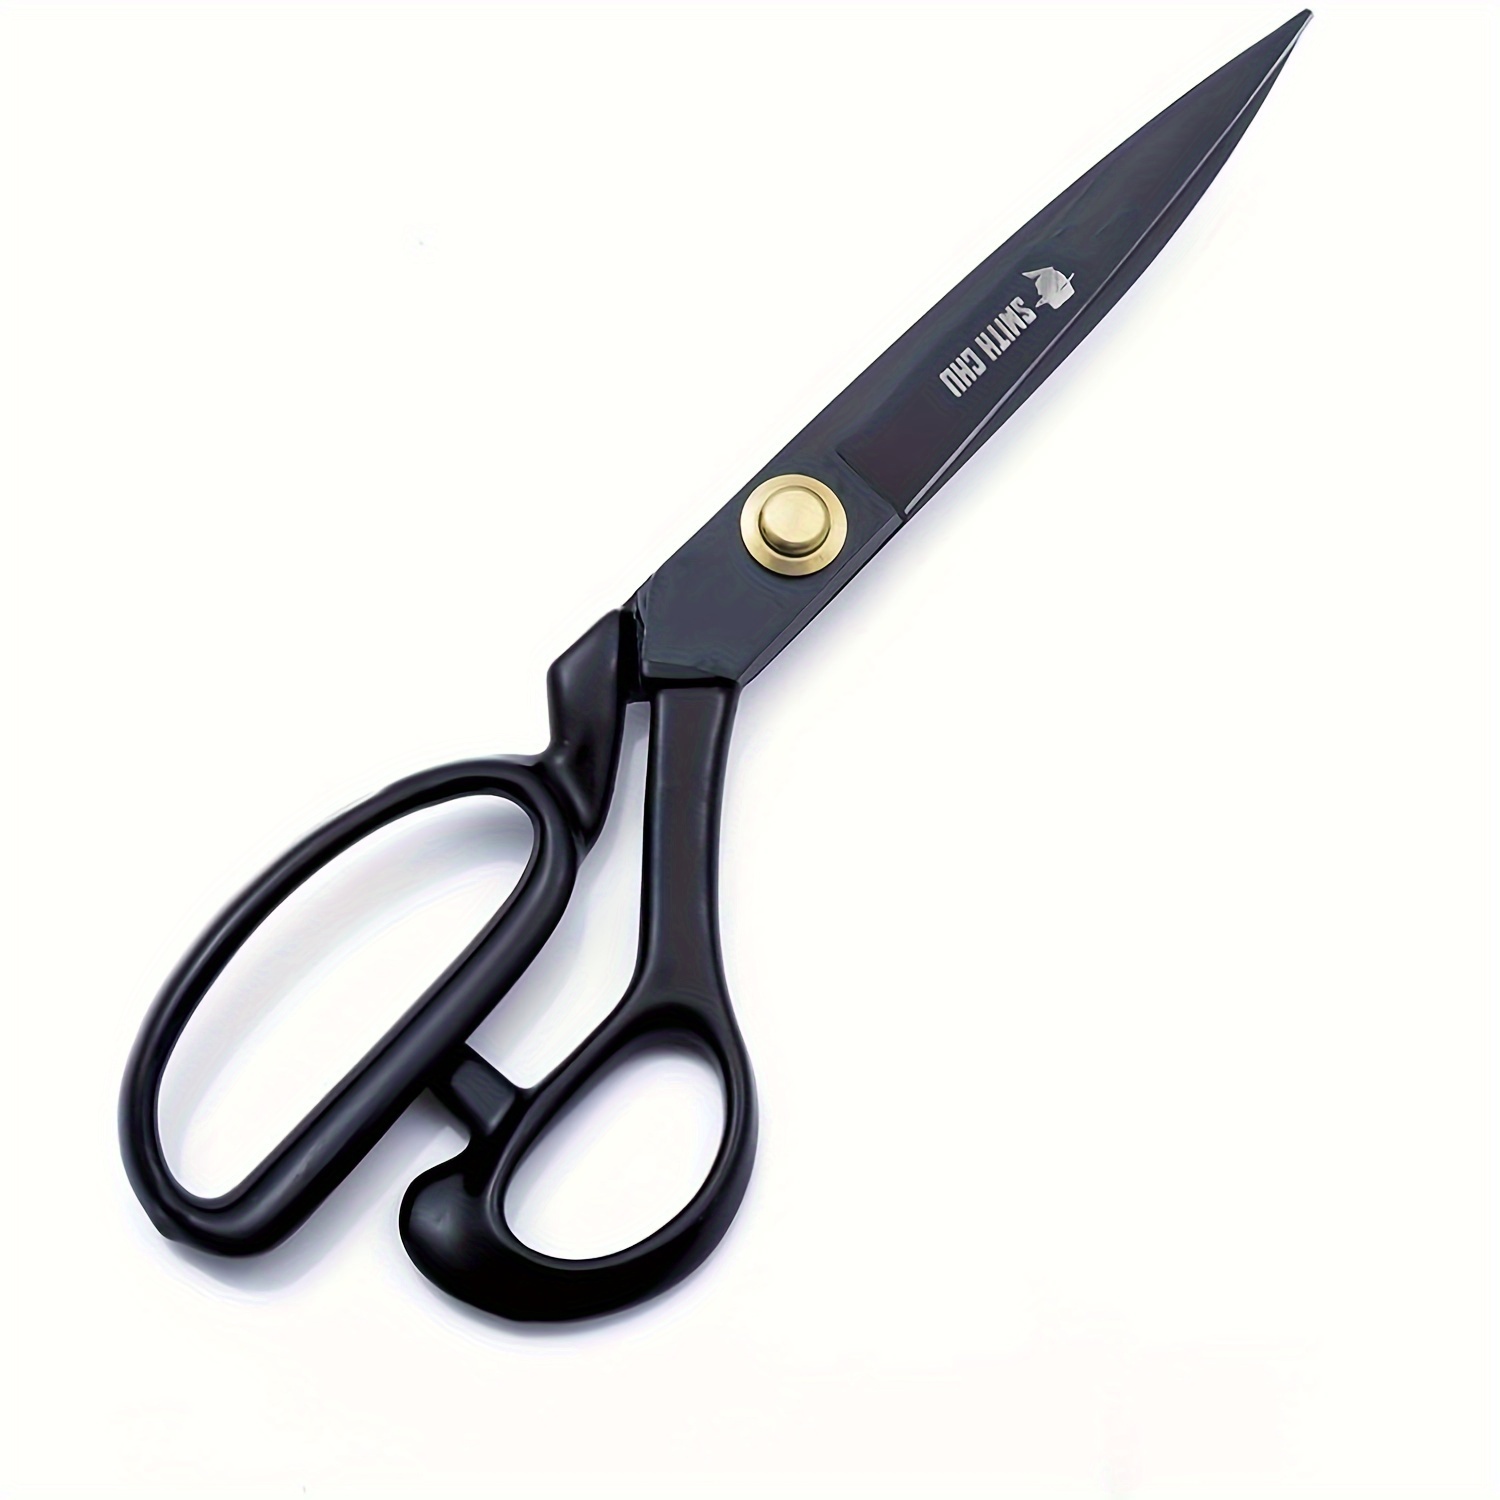 

Sewing Scissors-heavy Duty Tailor Scissors Shears For Fabric, Leather, Raw Materials, Dressingmaking, Altering-professional Upholstery Shears For Dressmakers Students Office Crafting (10 Inch)